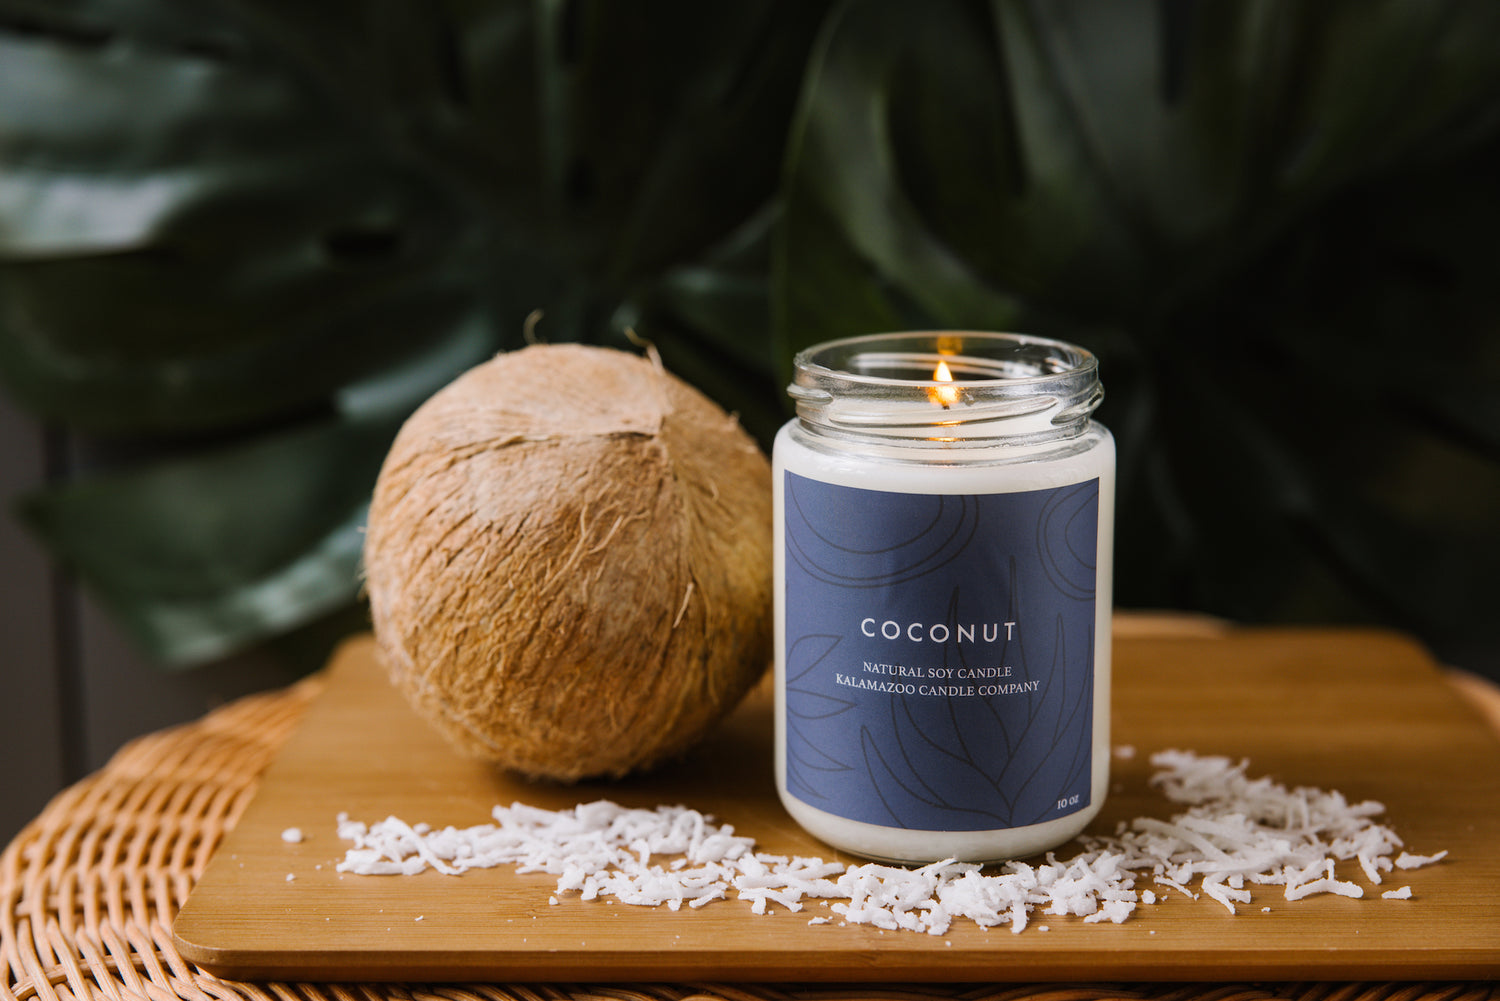 A coconut candle next to a coconut.